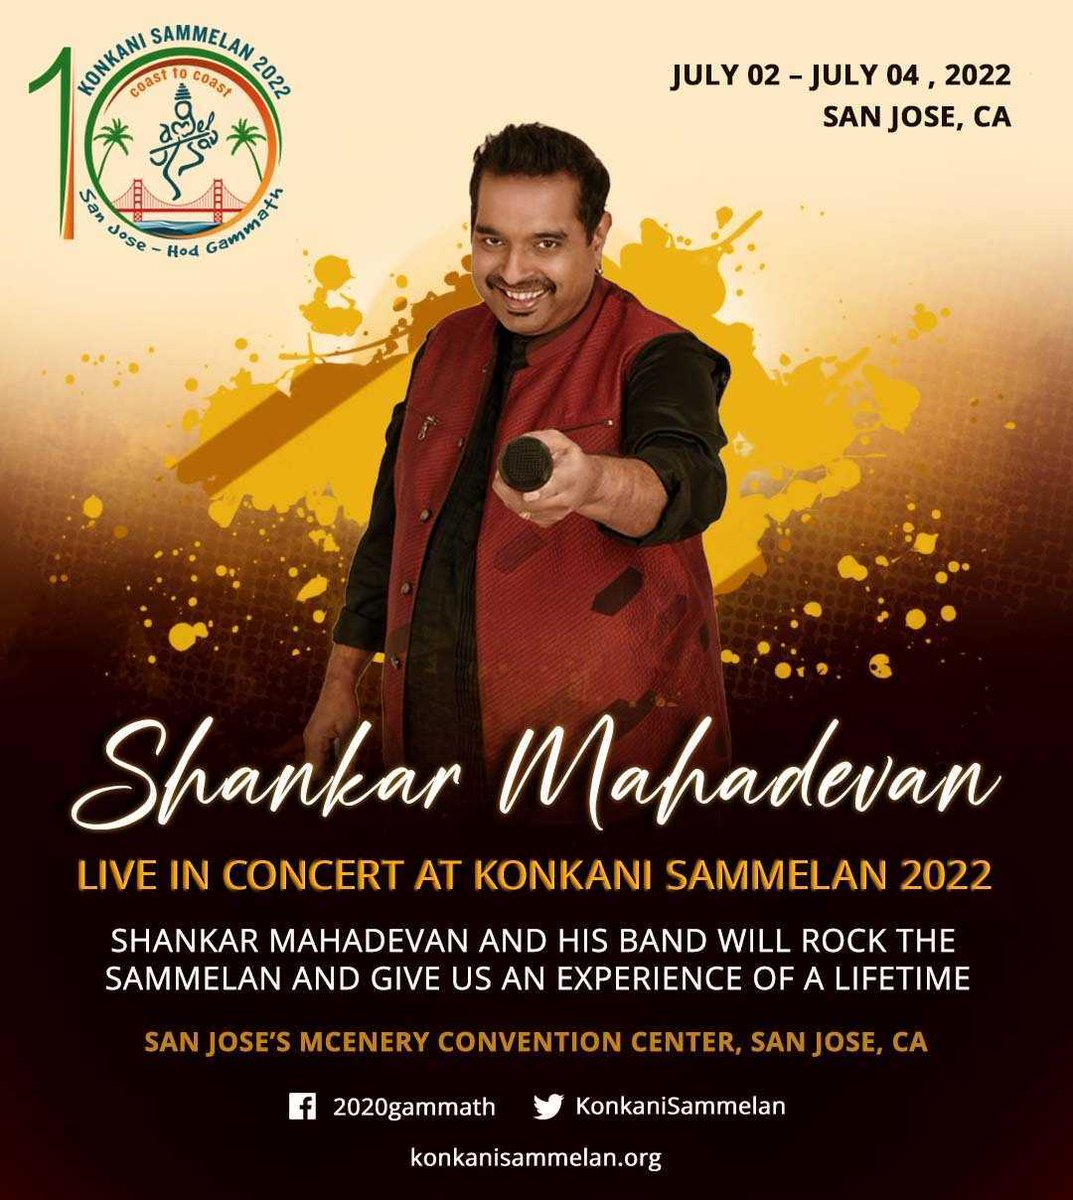 We are excited to announce a stunning addition to our star-studded lineup of entertainers and guests. We have added Shankar Mahadevan LIVE in Concert to the Konkani Sammelan 2022 experience! Shankar Mahadevan and his band will rock the crowd & give us an experience of a lifetime.